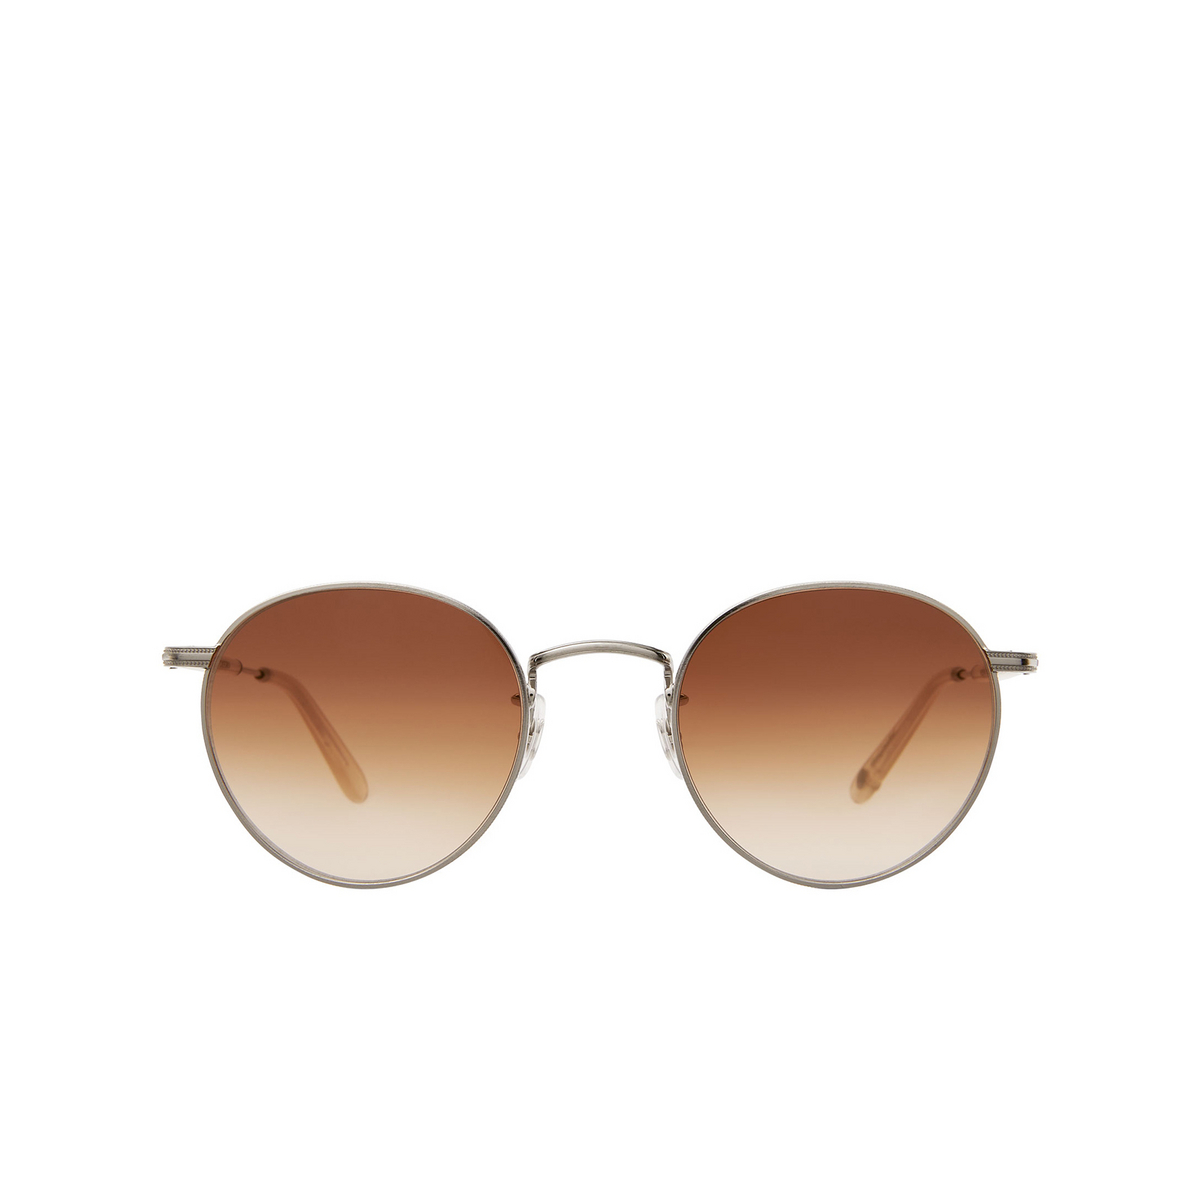 Garrett Leight® Round Sunglasses: Wilson M Sun color Brushed Silver-matte Beige Bs-mbge/sfbrntg - front view.